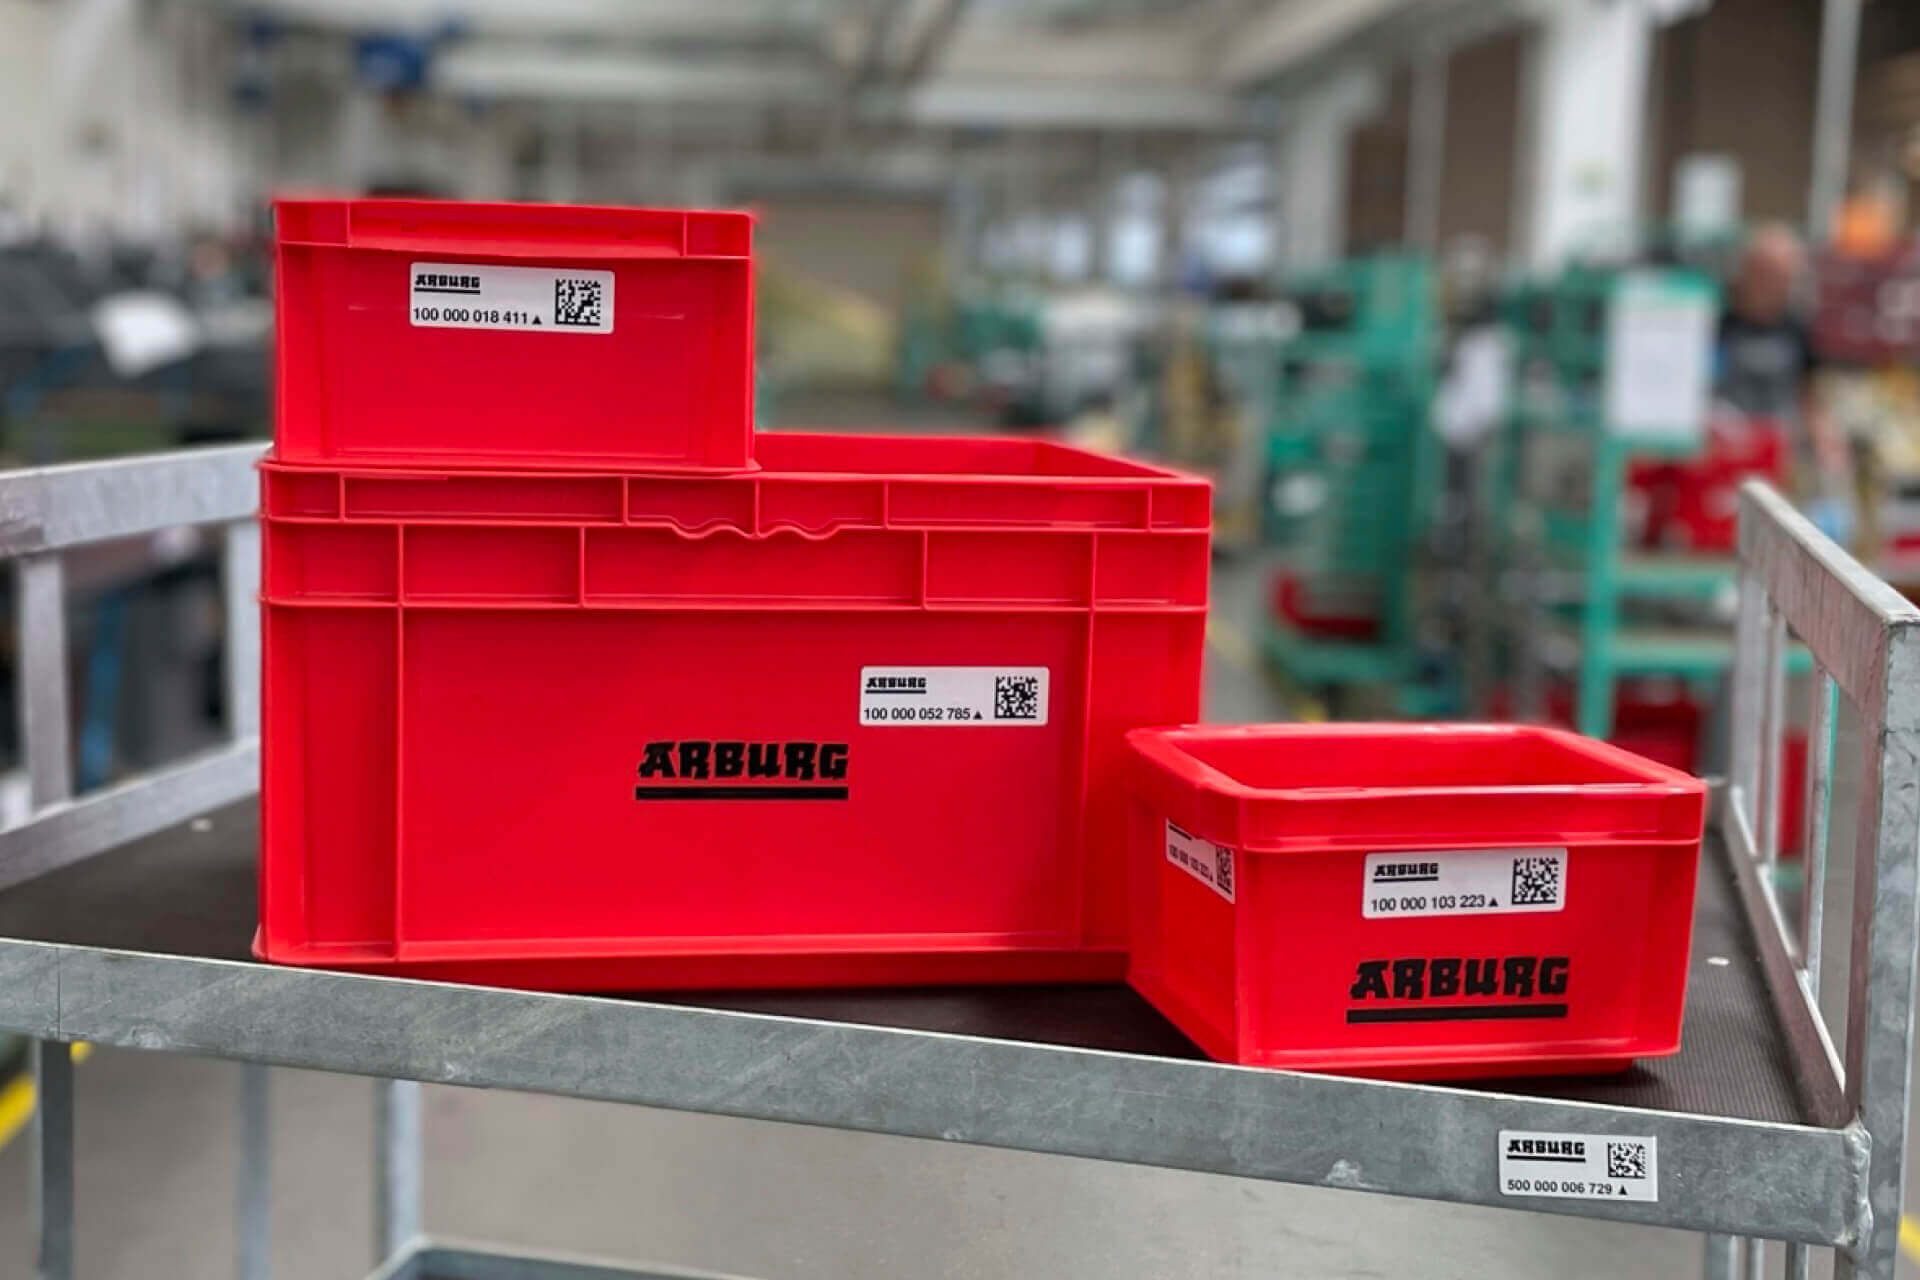 100,000 ARBURG containers are equipped with Datamatrix codes and RFID labels from Schreiner ProTech.